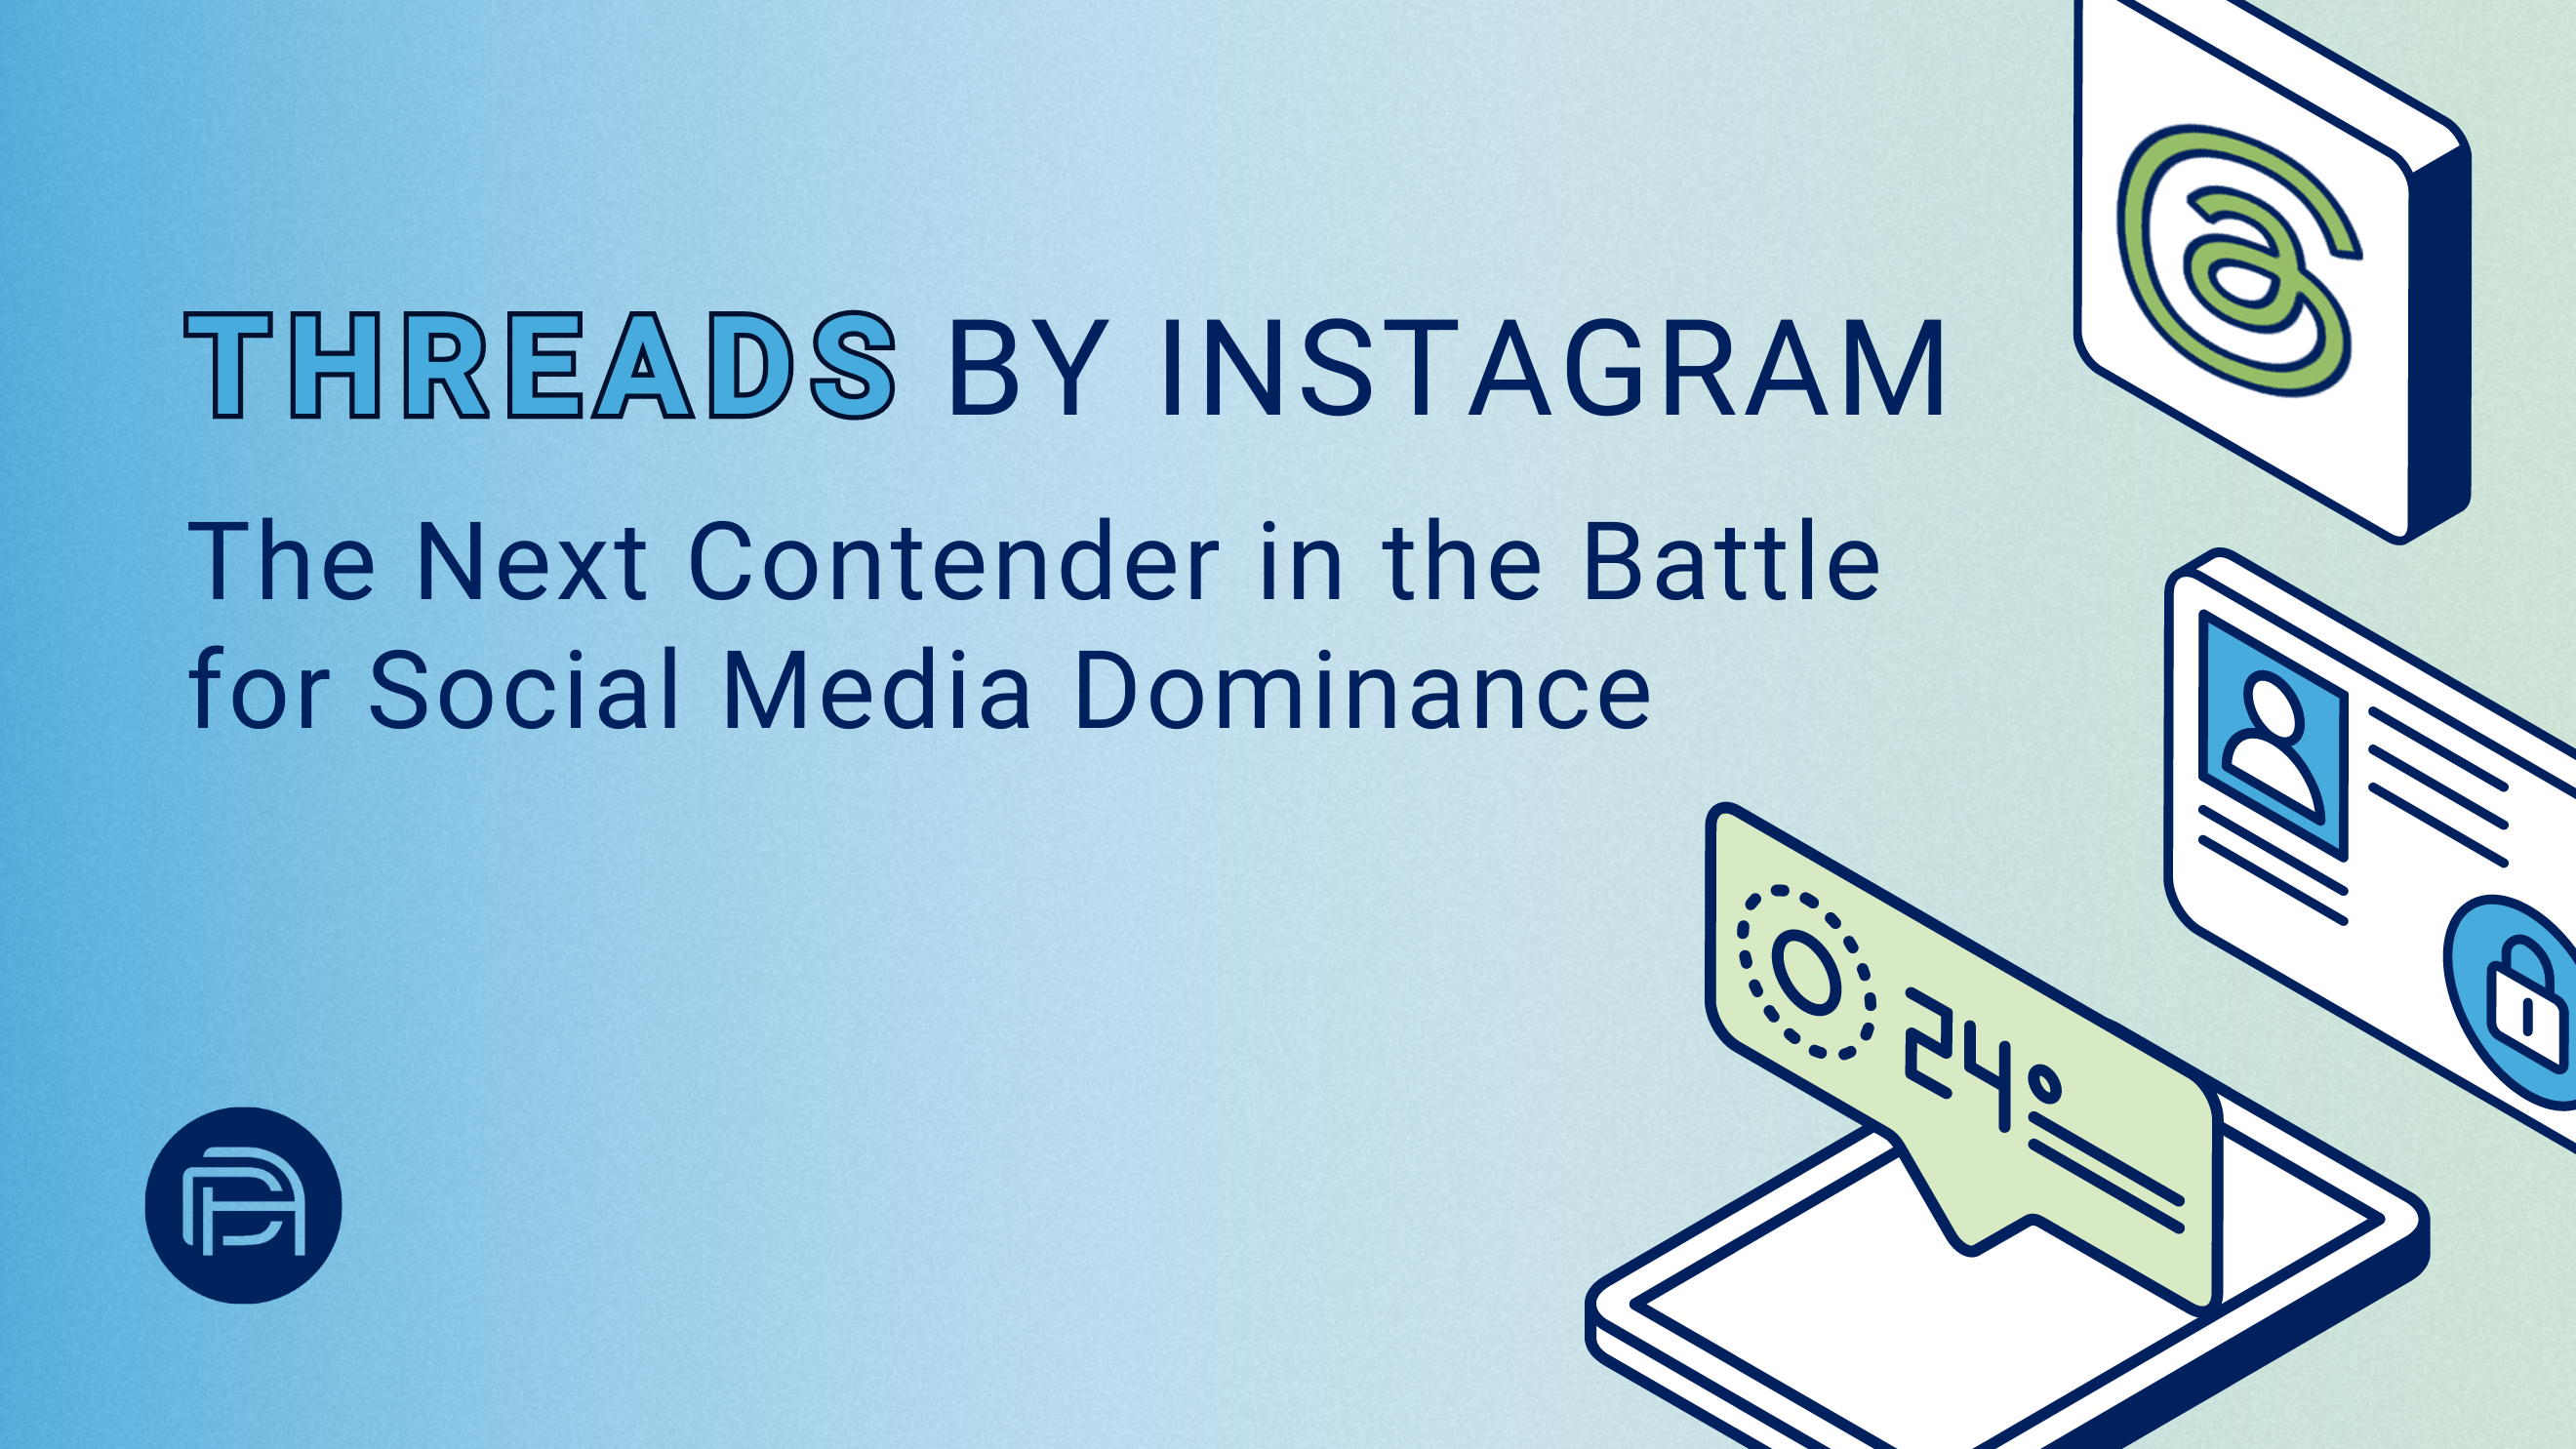 Threads by Instagram: The Next Contender in the Battle for Social Media Dominance